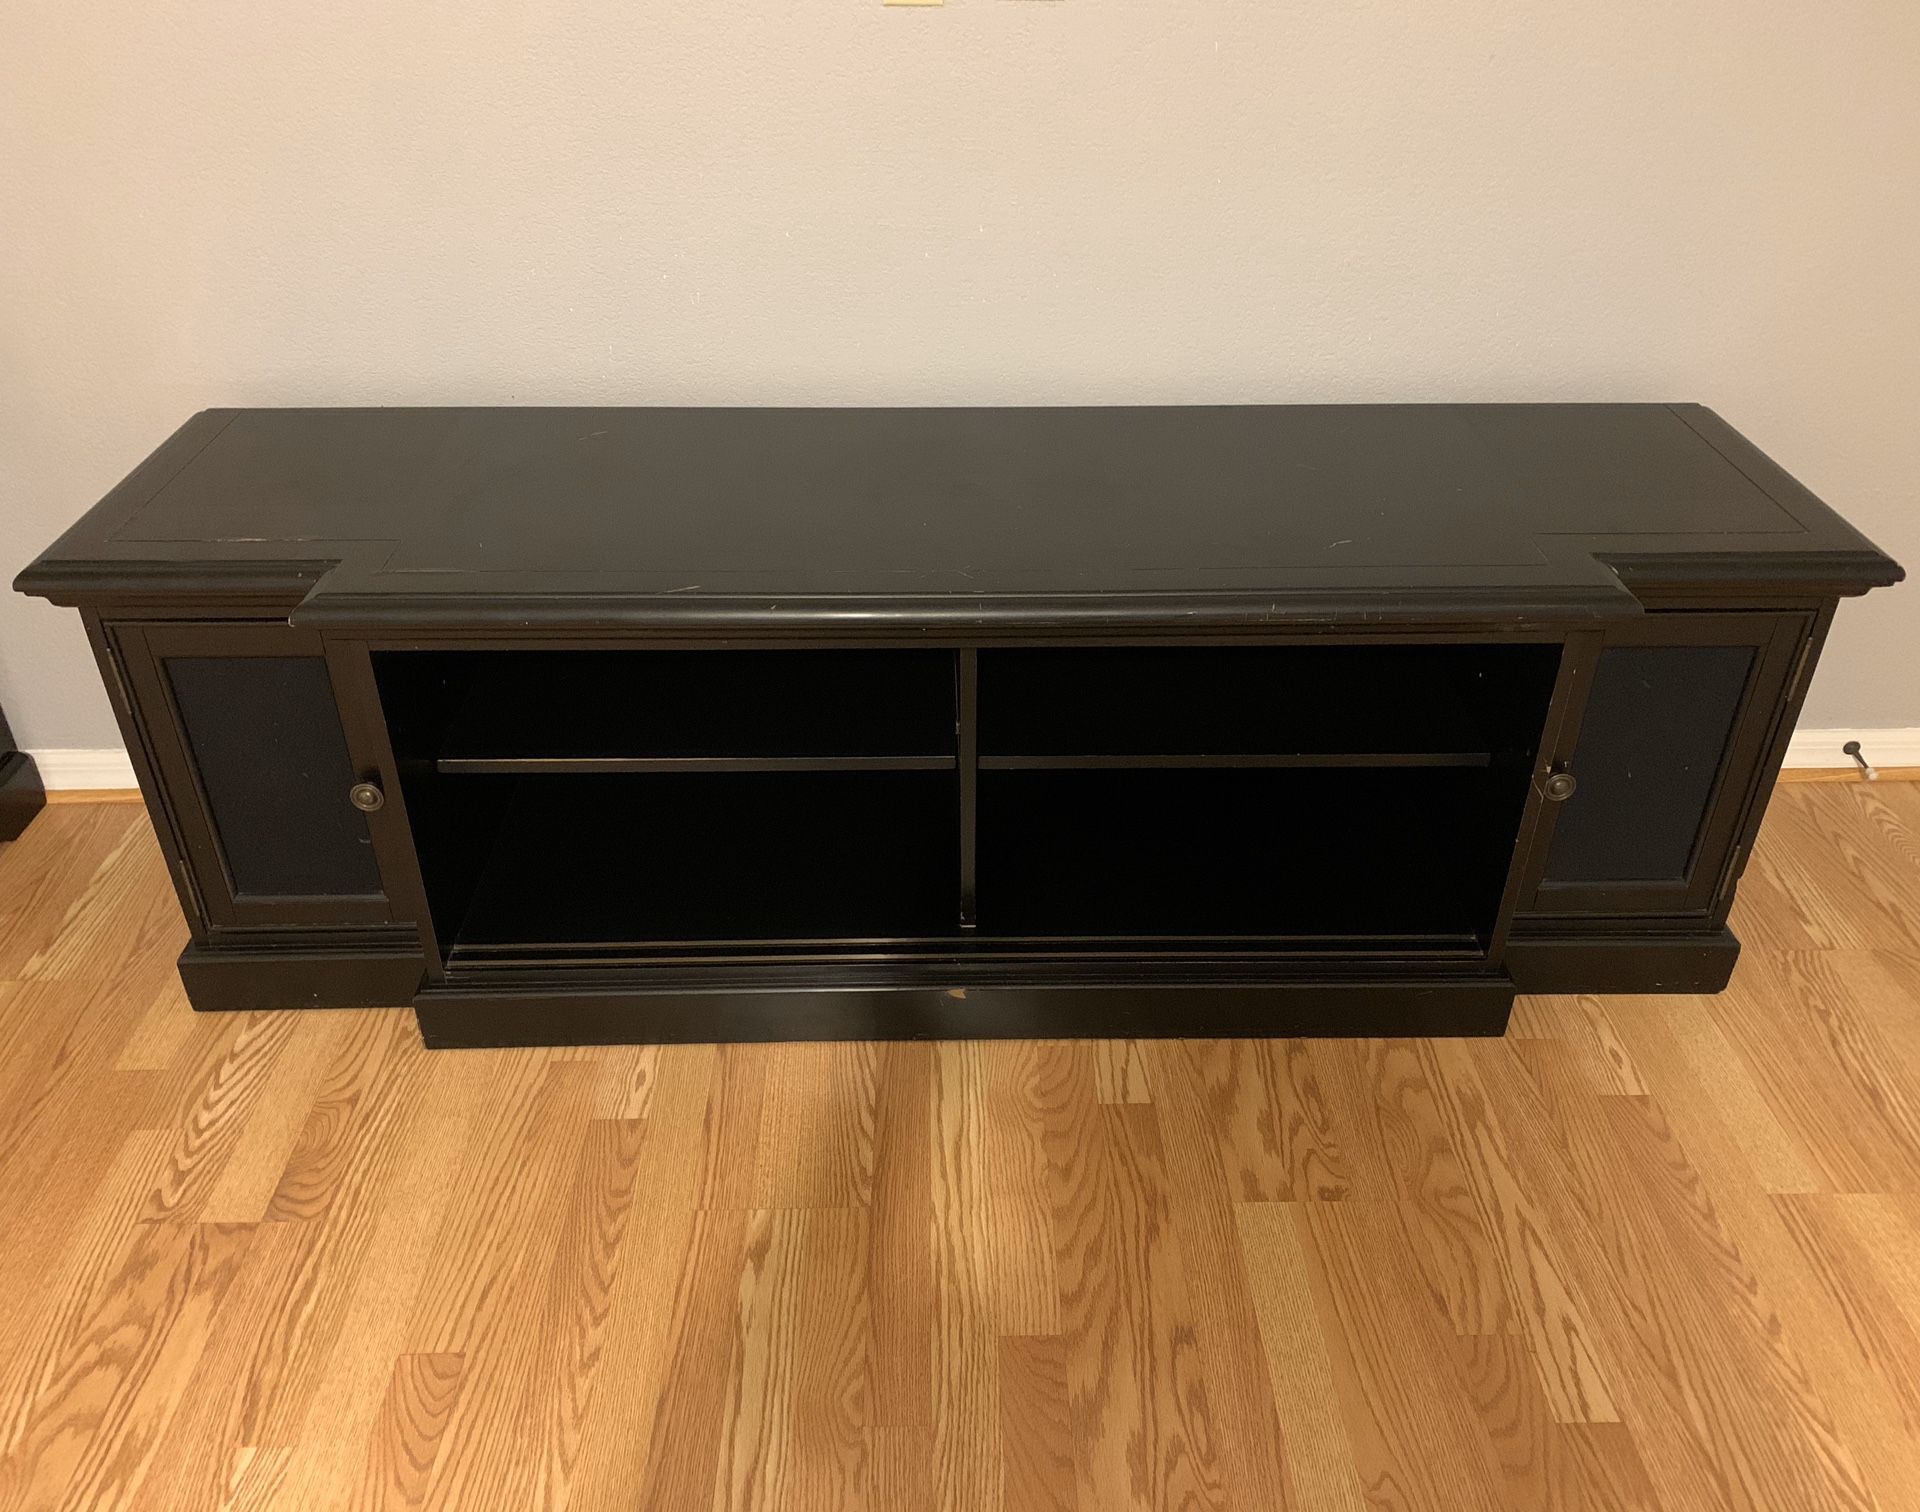 Pre-Owned Wood TV 📺 Stand - Good Condition